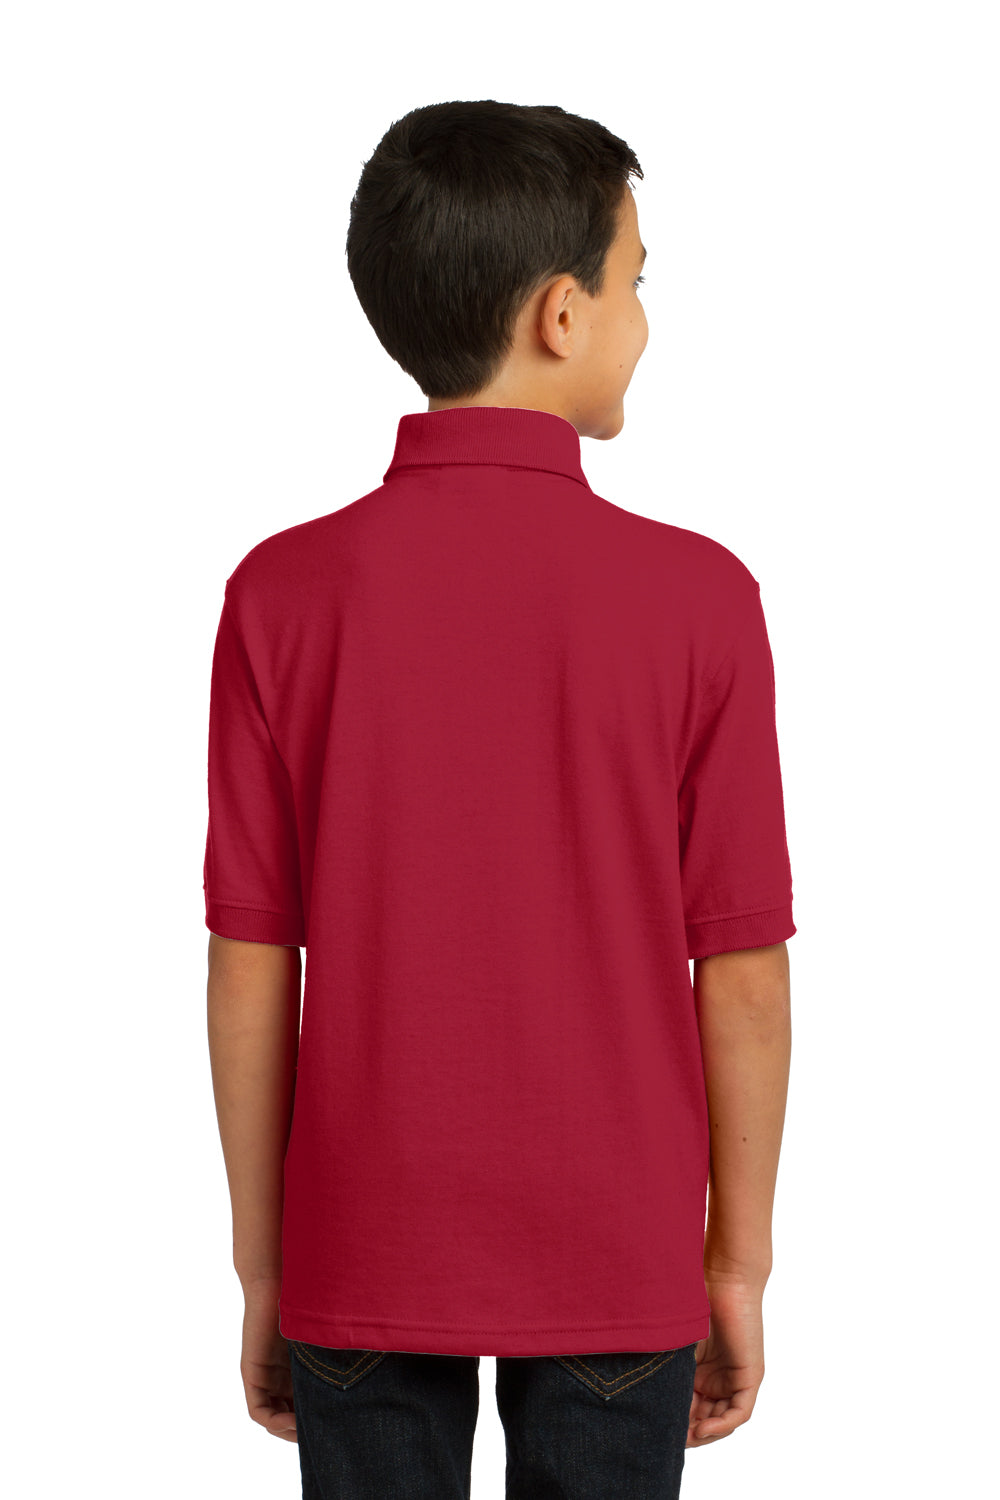 Port & Company KP55Y Youth Core Stain Resistant Short Sleeve Polo Shirt Red Back